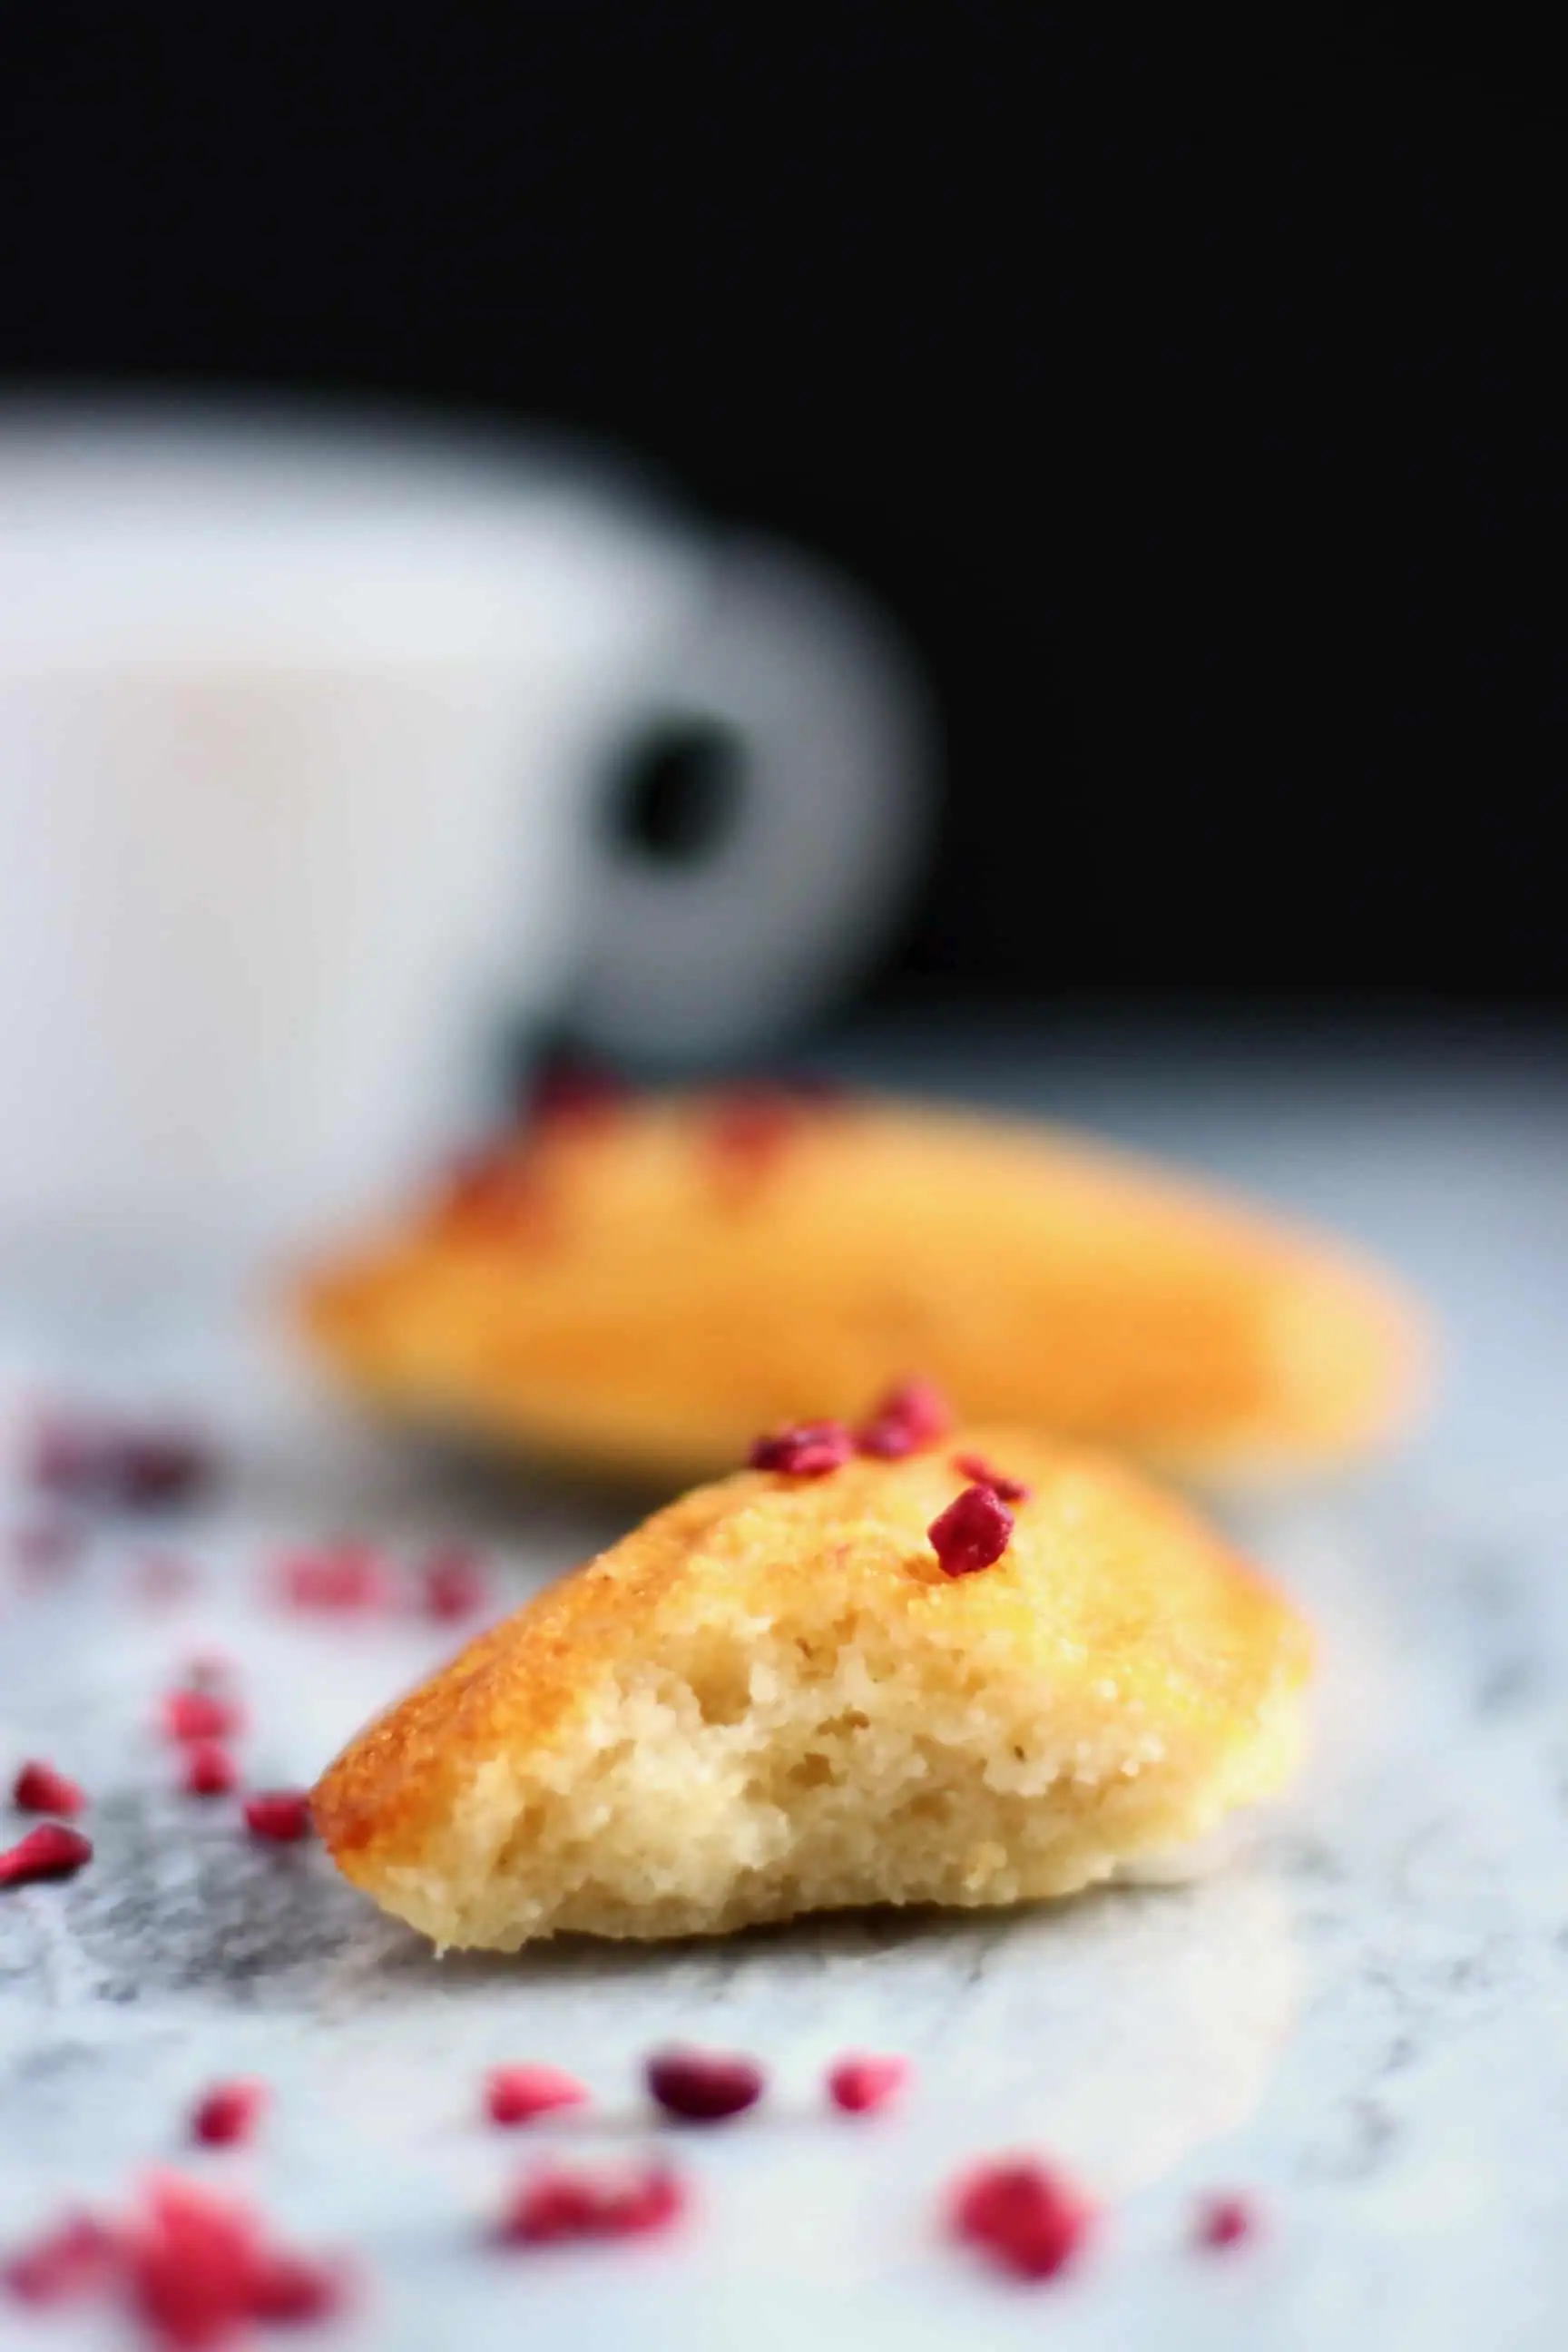 Two gluten-free vegan madeleines on a marble background with a white cup against a black background